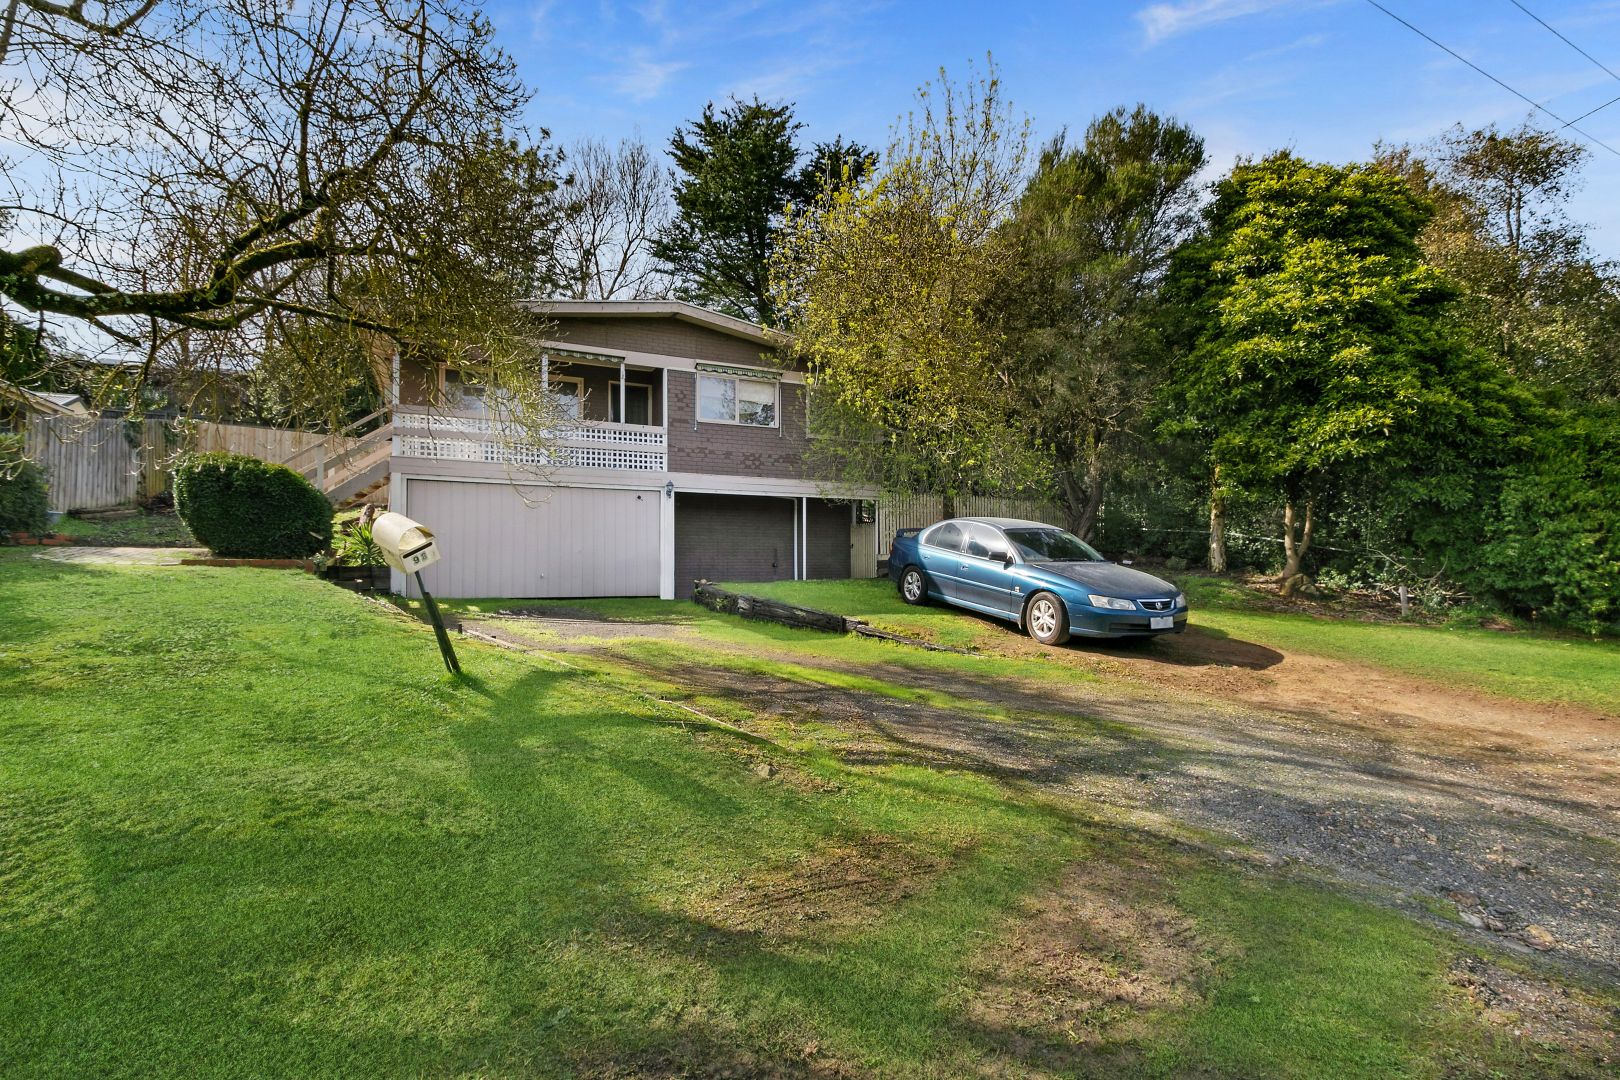 98 Hereford Road, Mount Evelyn VIC 3796